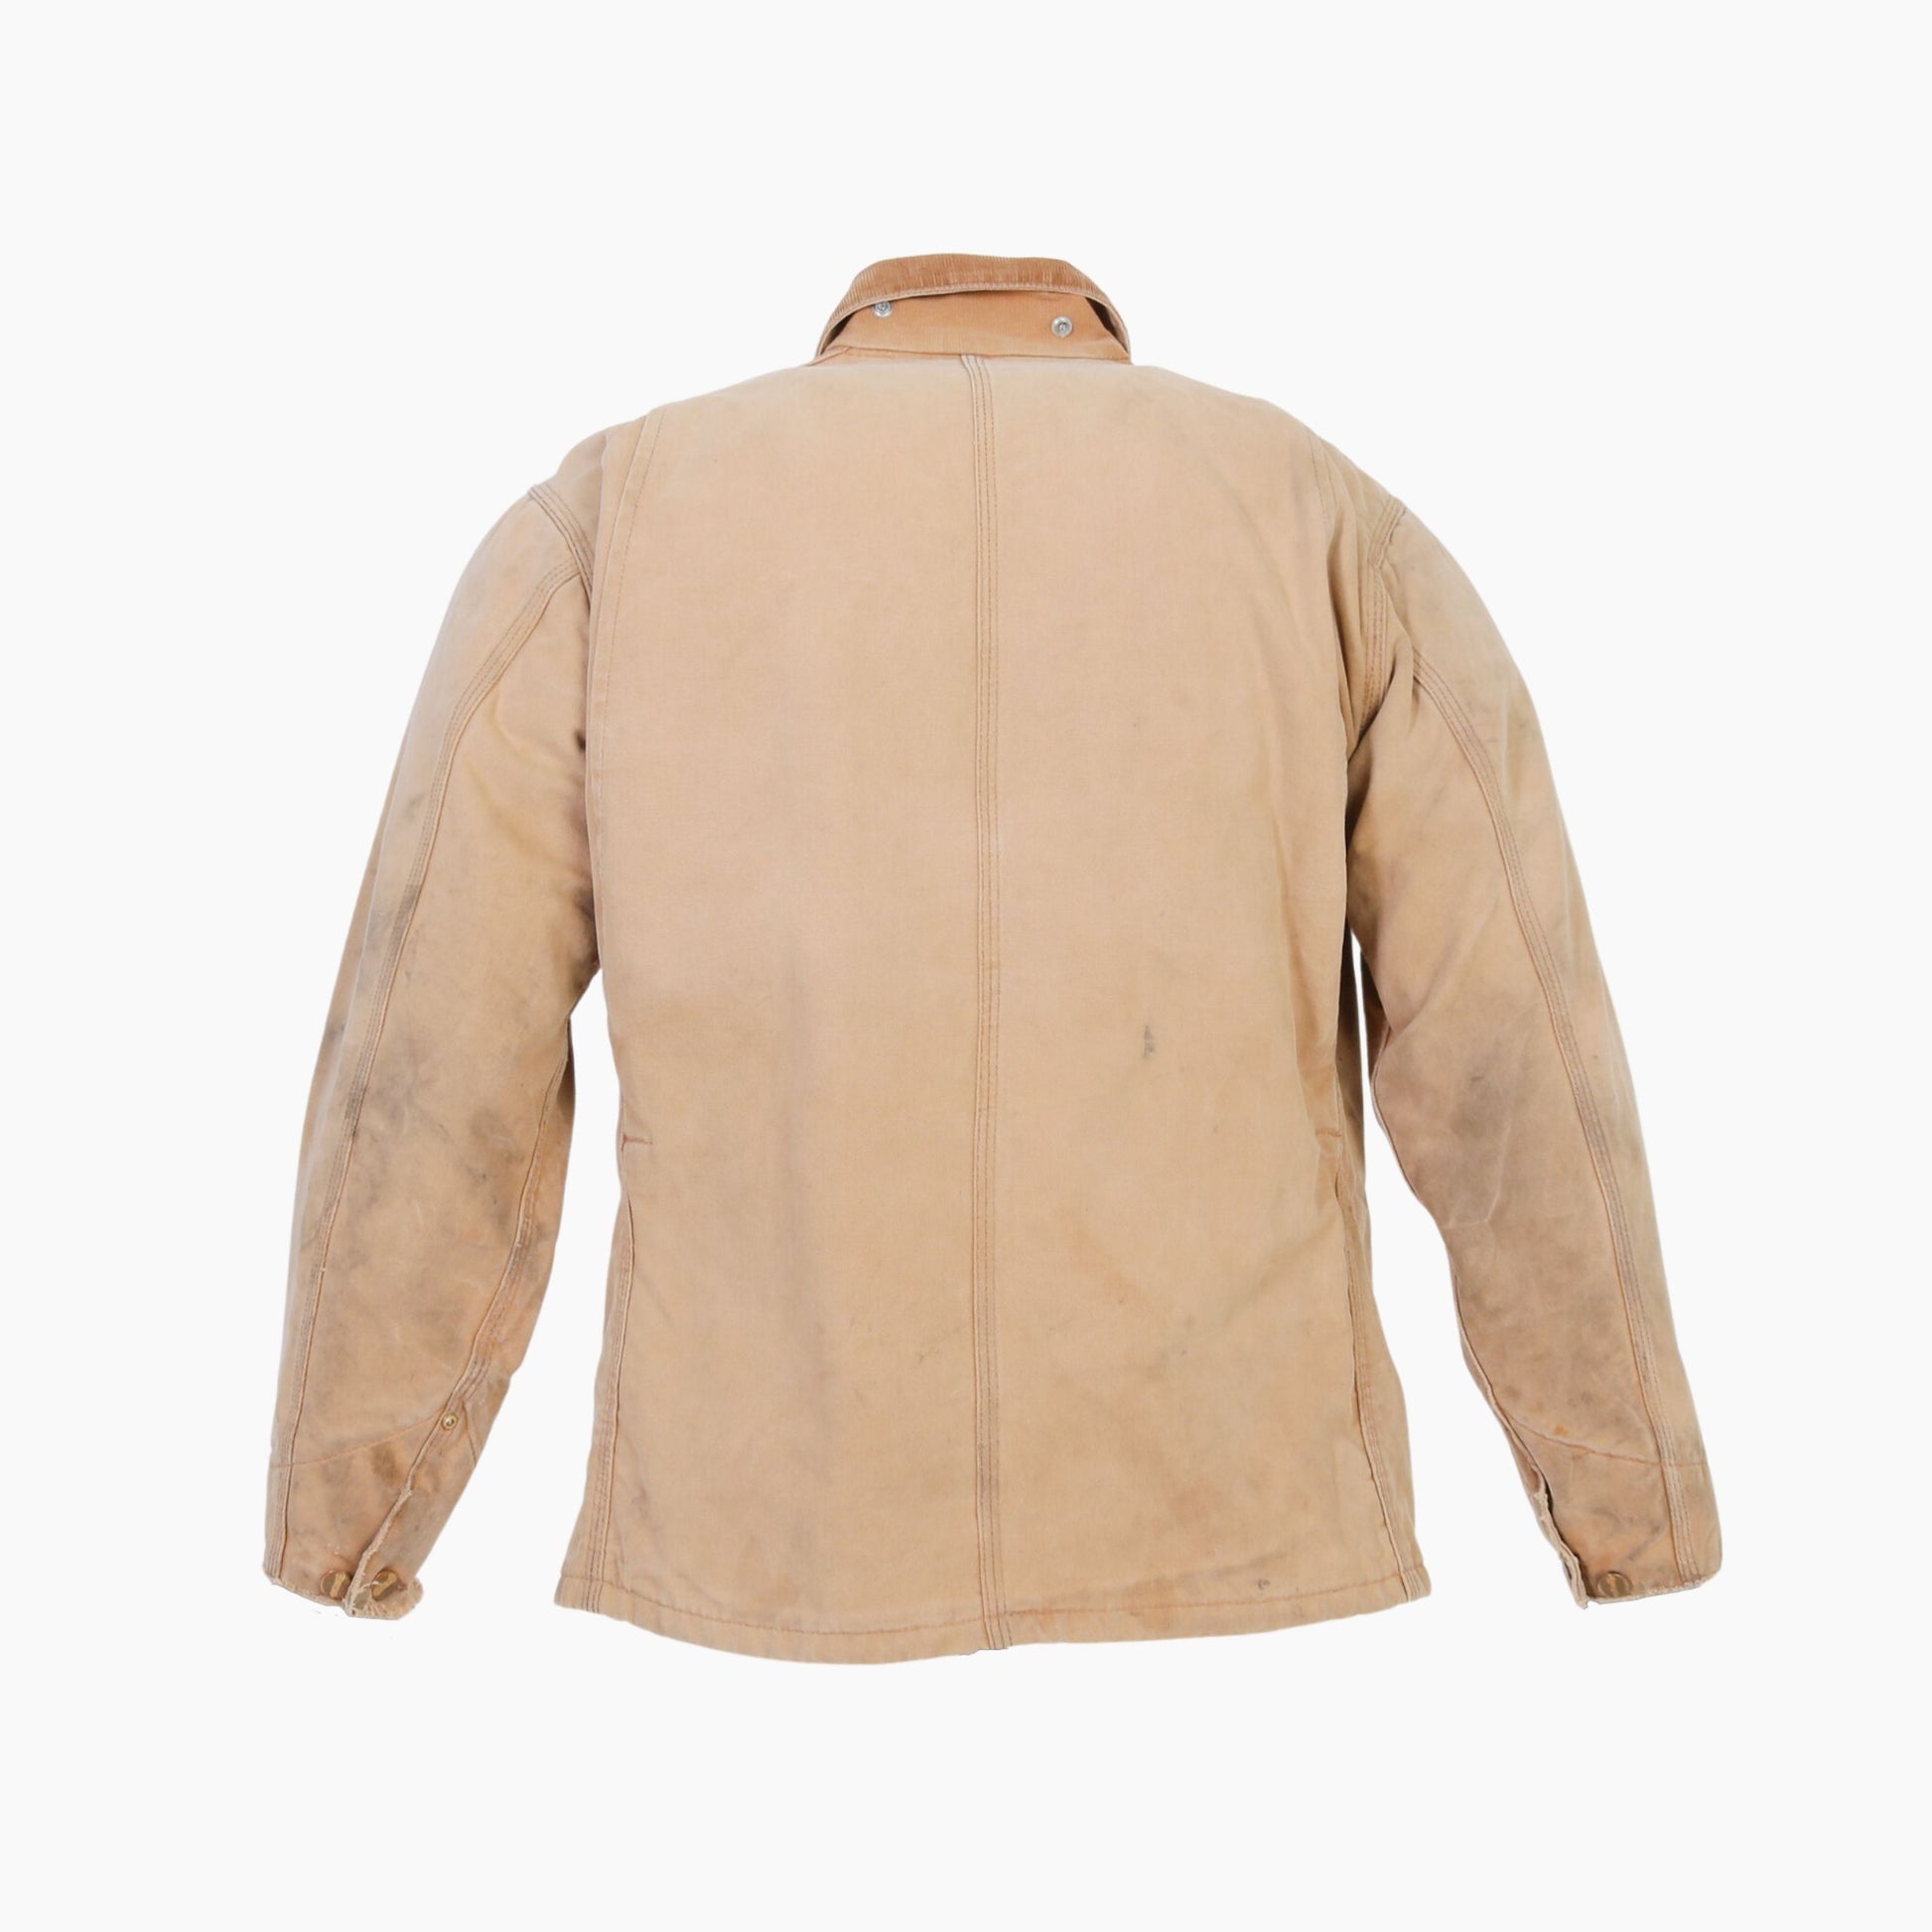 Traditional Chore Jacket - Washed Hamilton Brown - American Madness